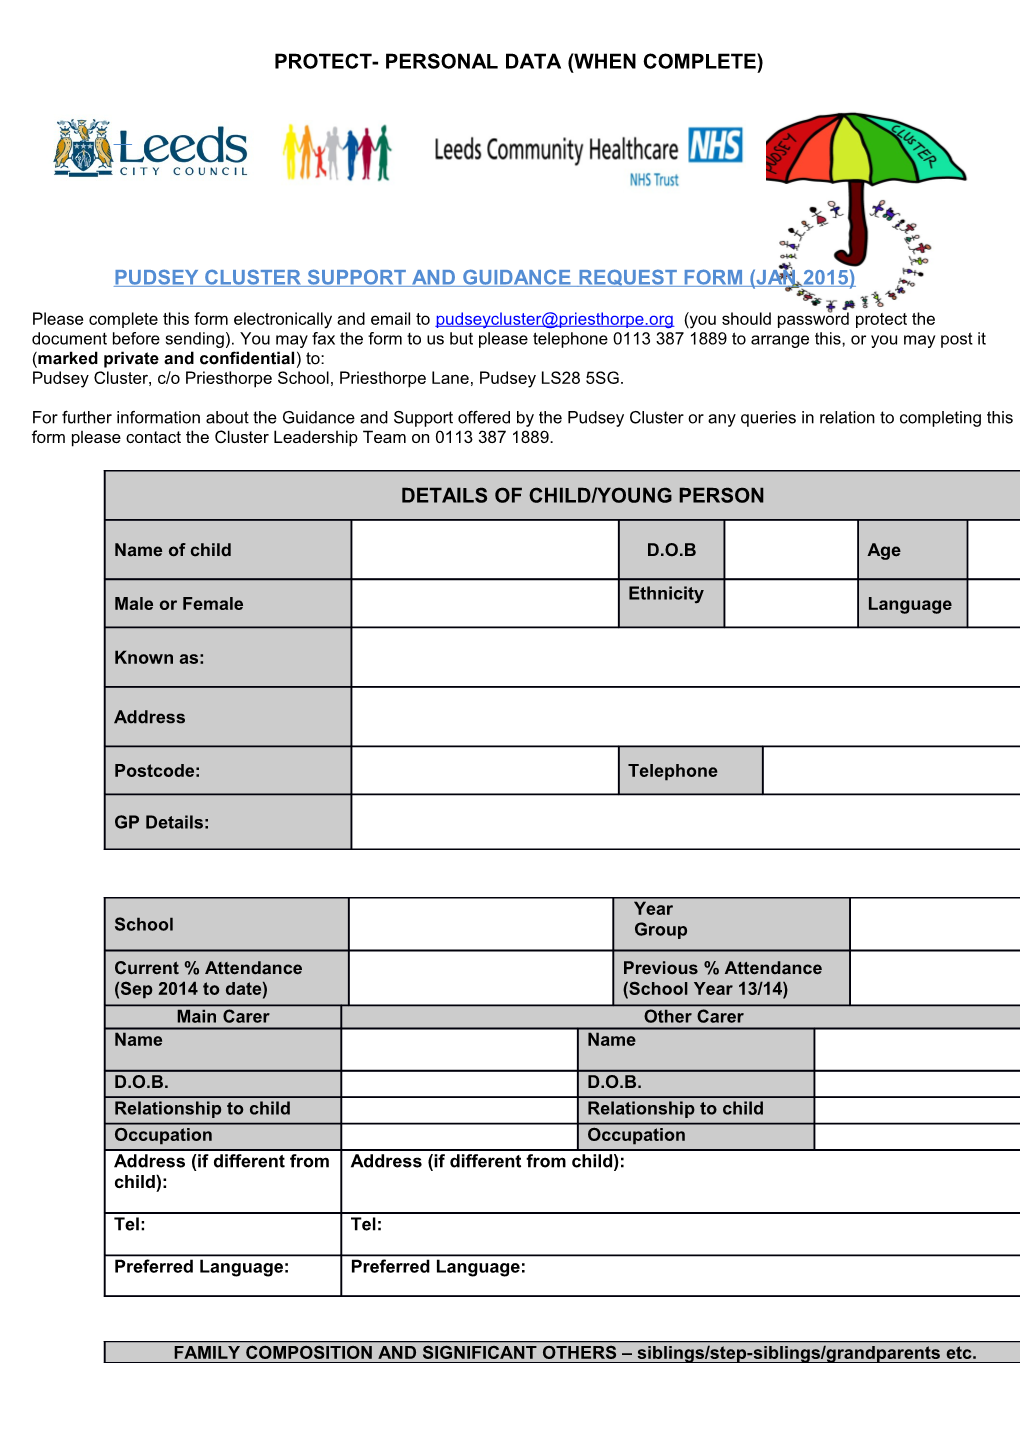 Bramley Cluster Support and Guidance Request Form (2011/12)